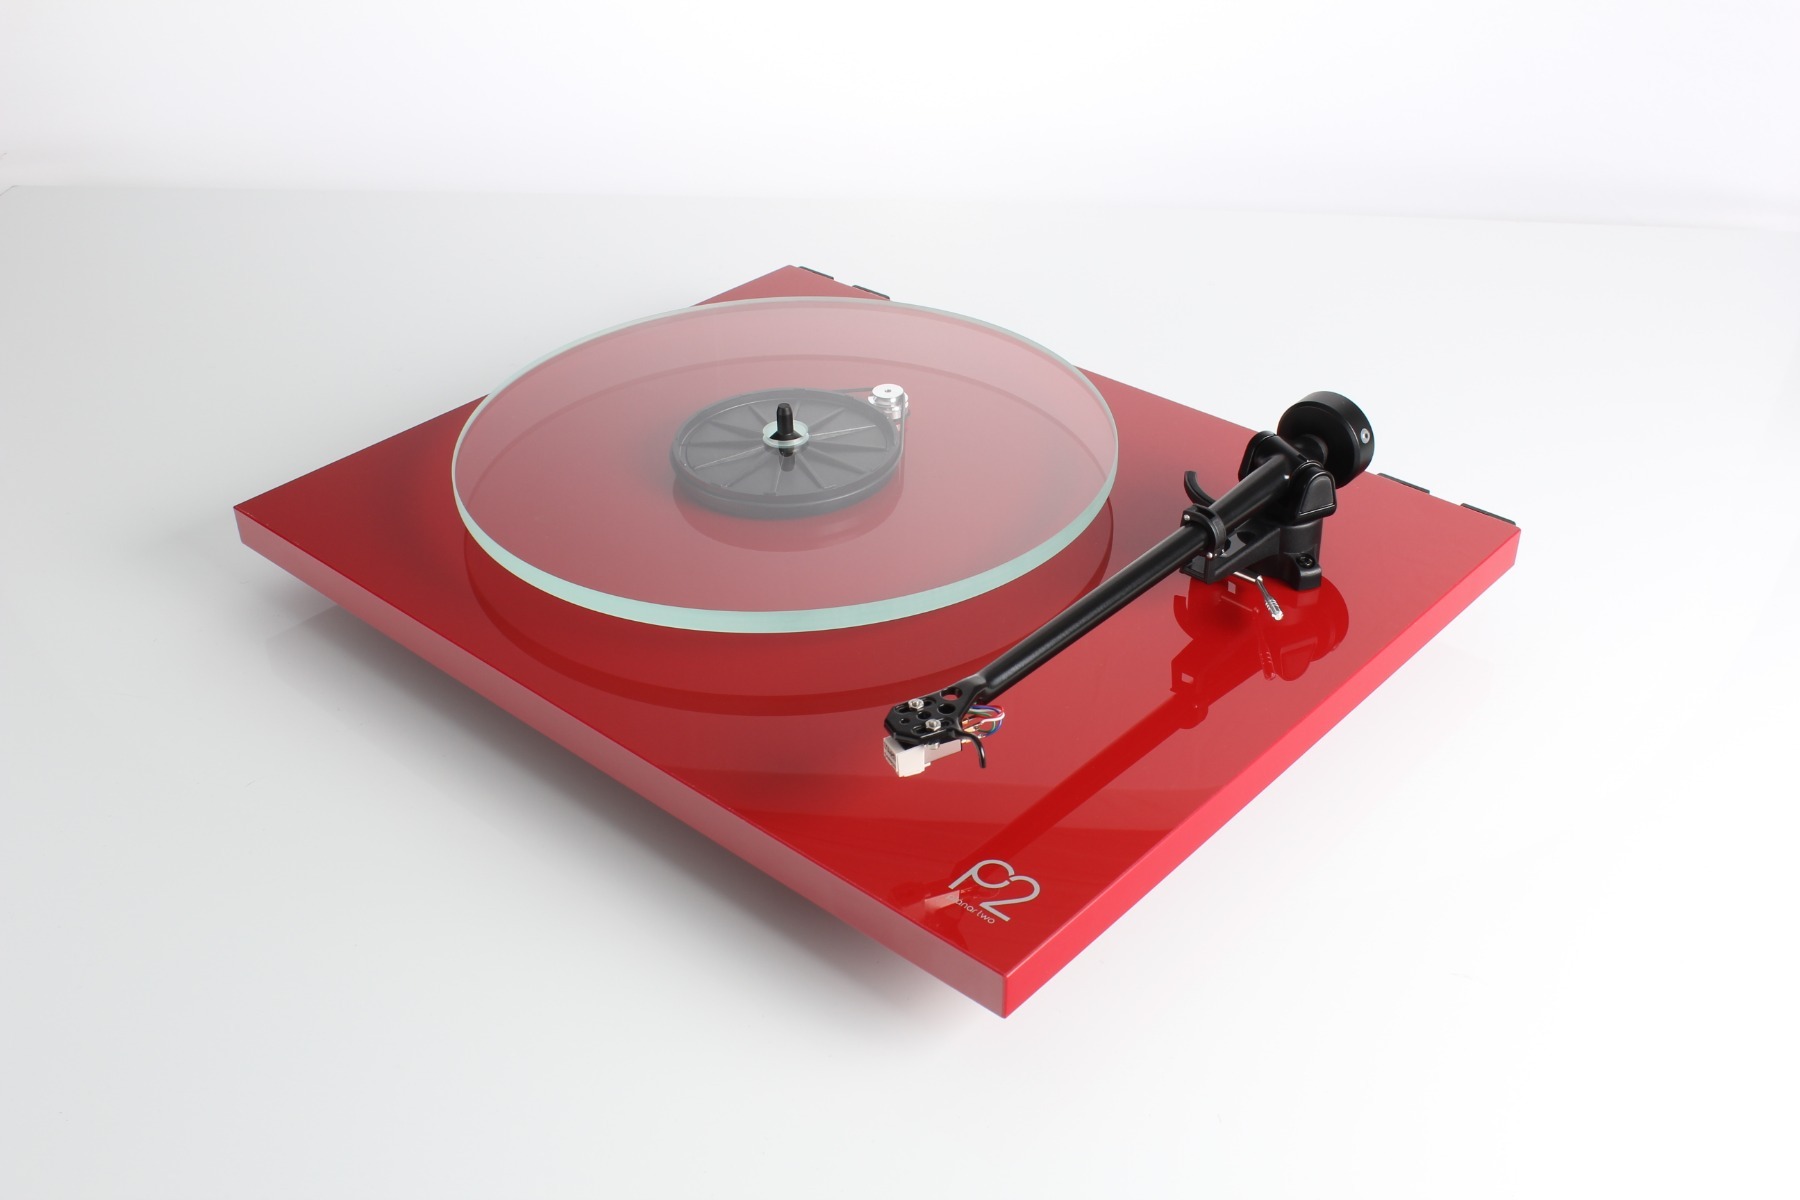 Planar 2 in red